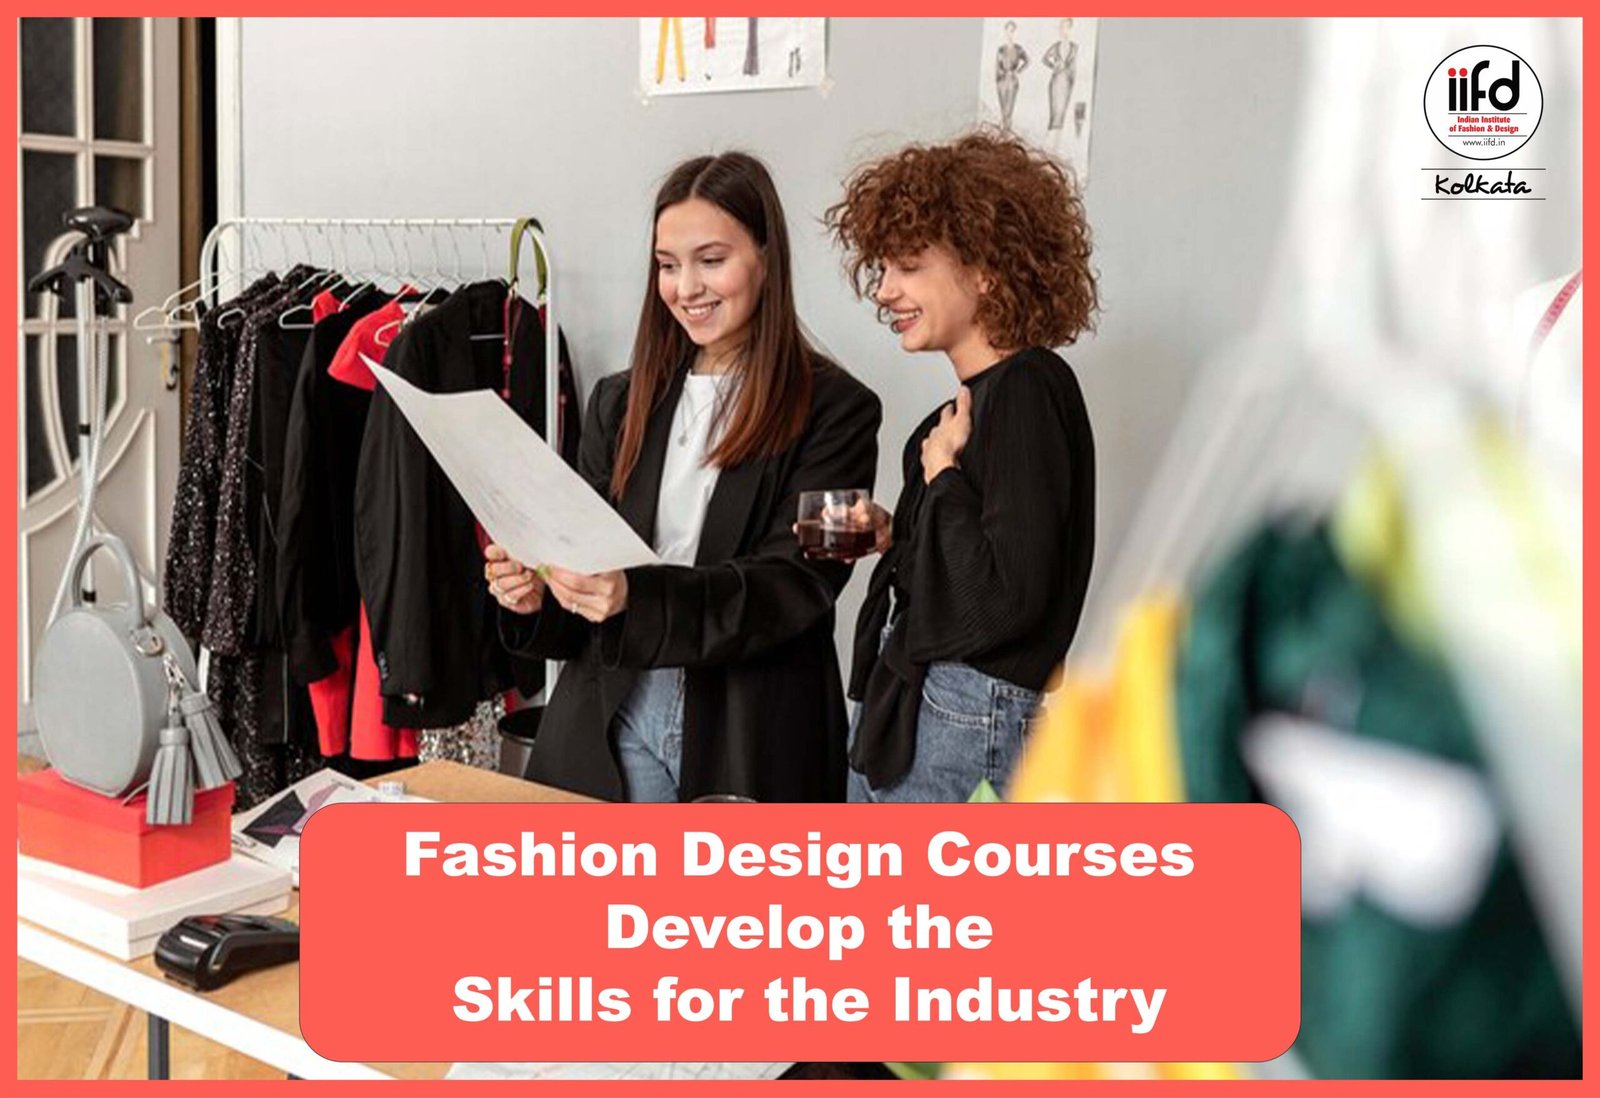 Fashion Design Courses Develop the Skills for the Industry